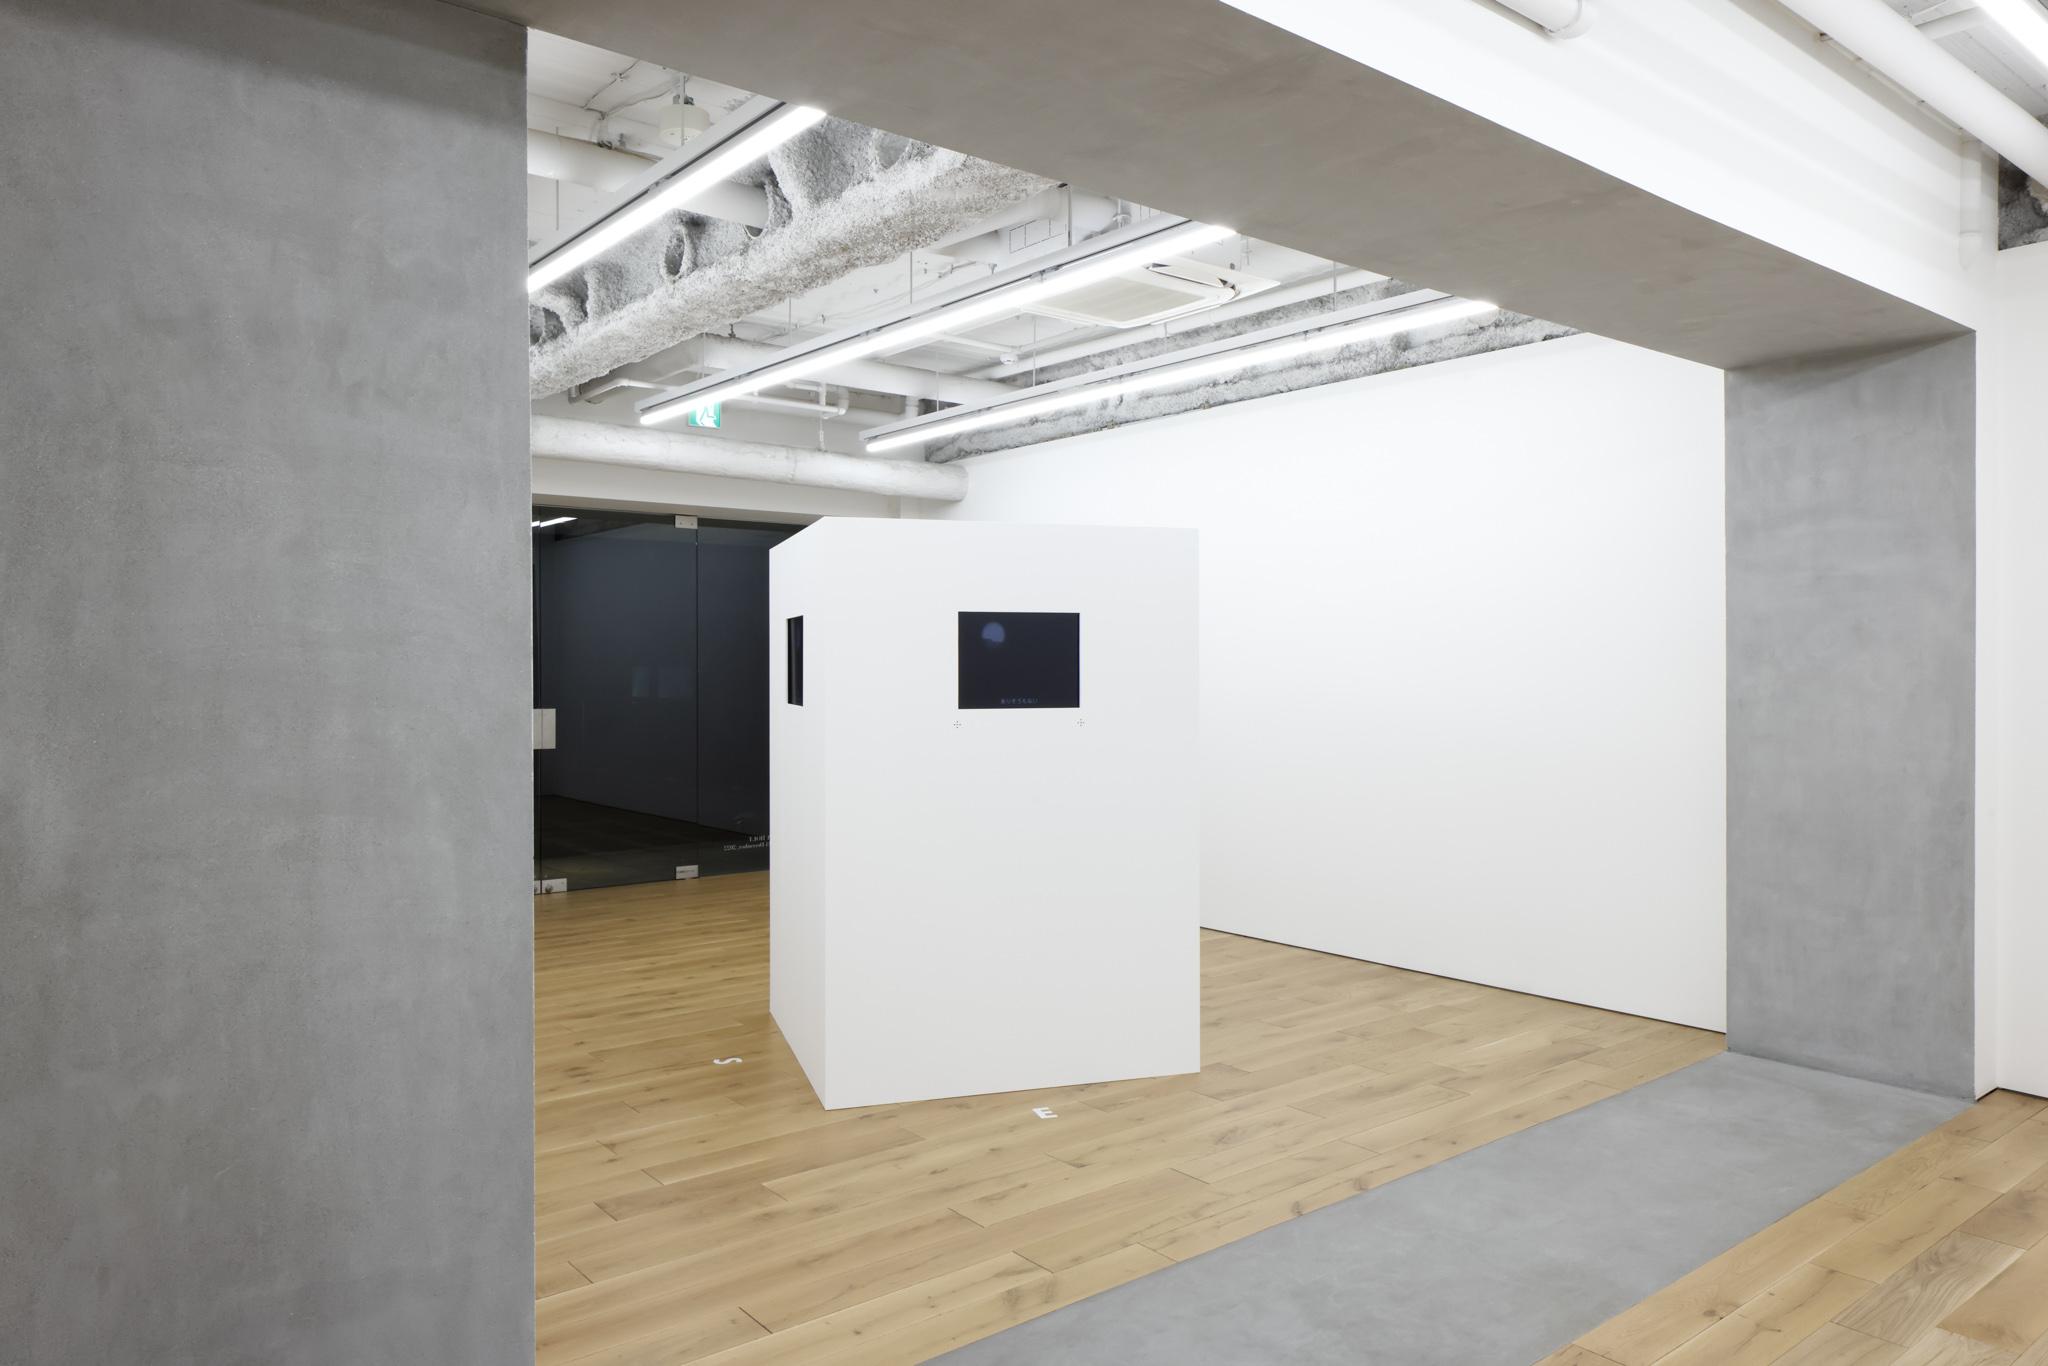 Installation view of the exhibition Nancy Holt Points of View at TARO NASU in Tokyo, Japan